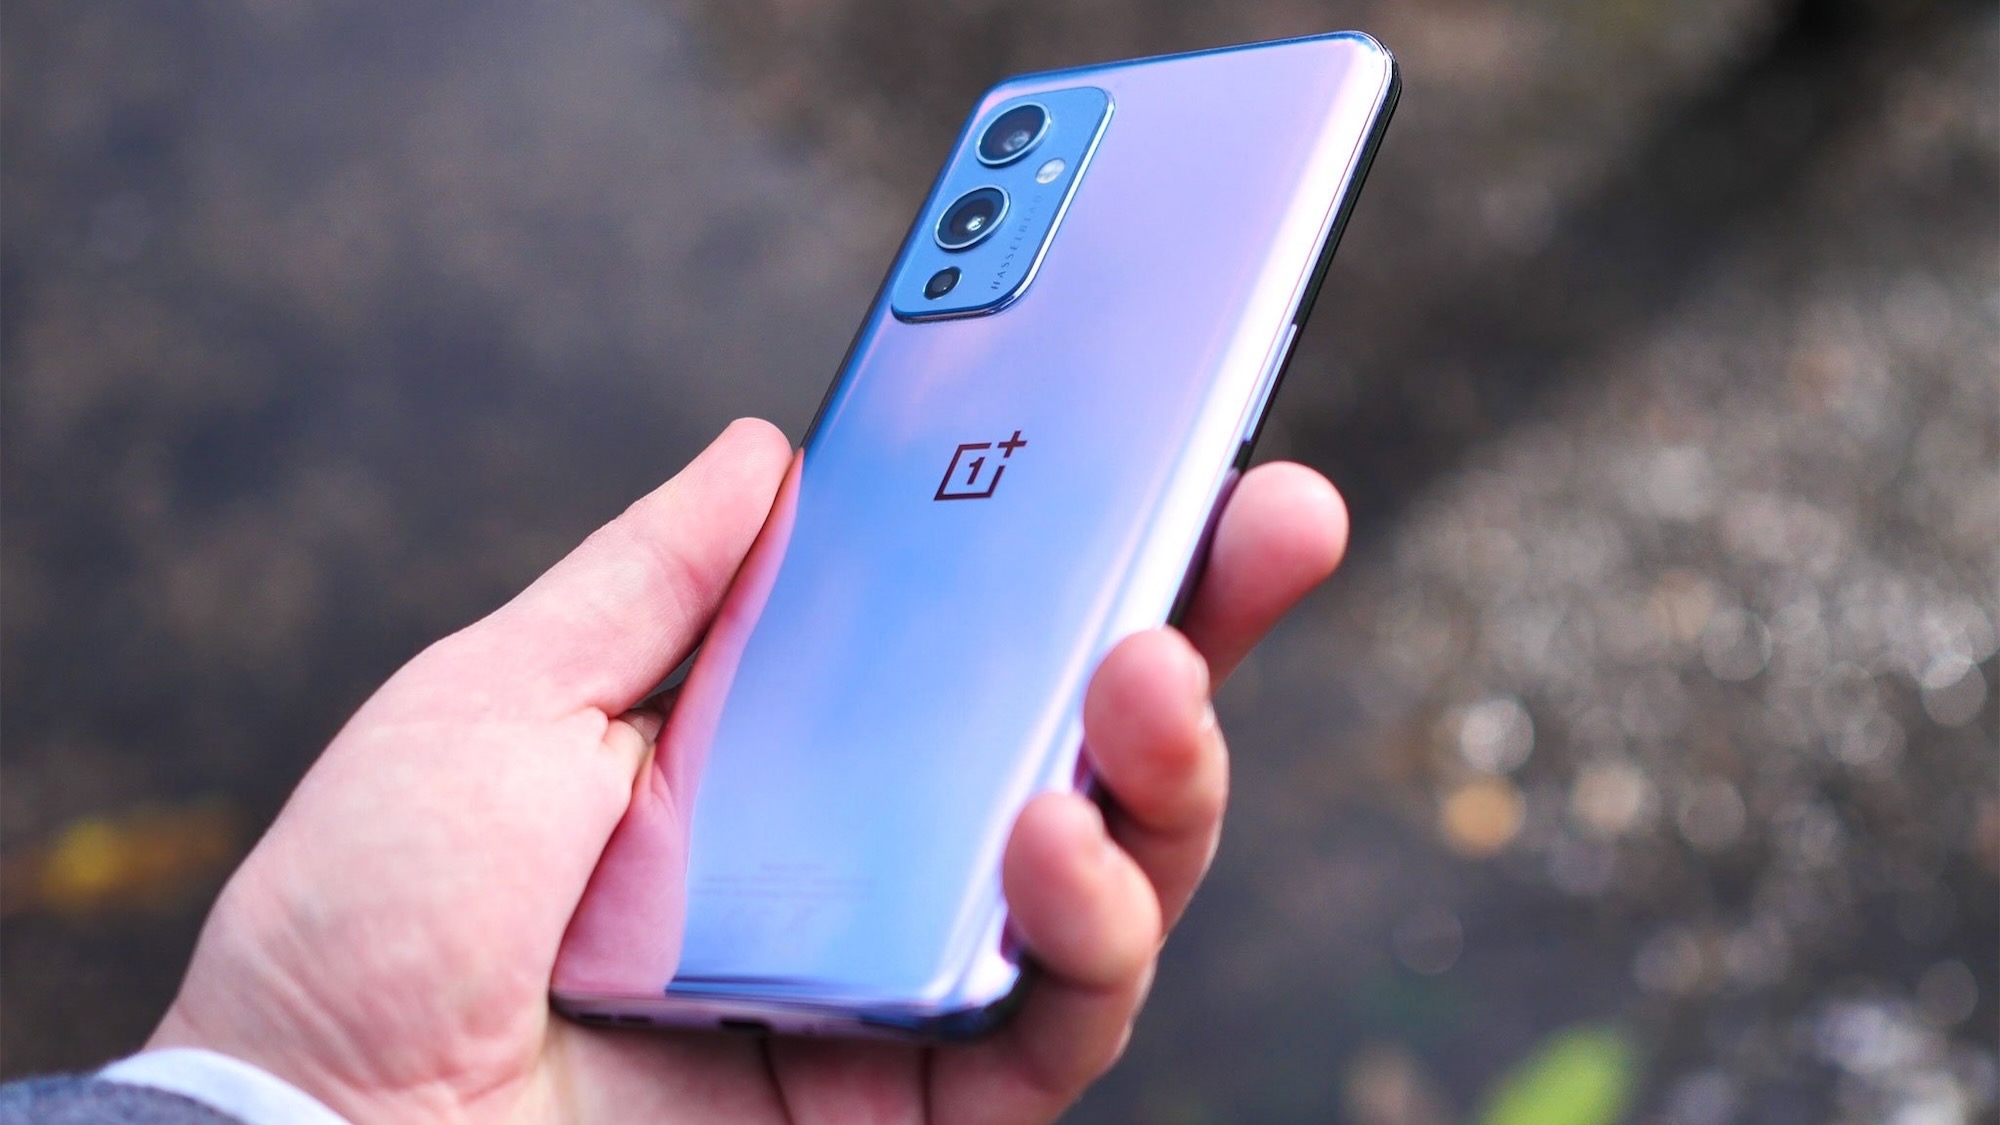 Holding the OnePlus 9